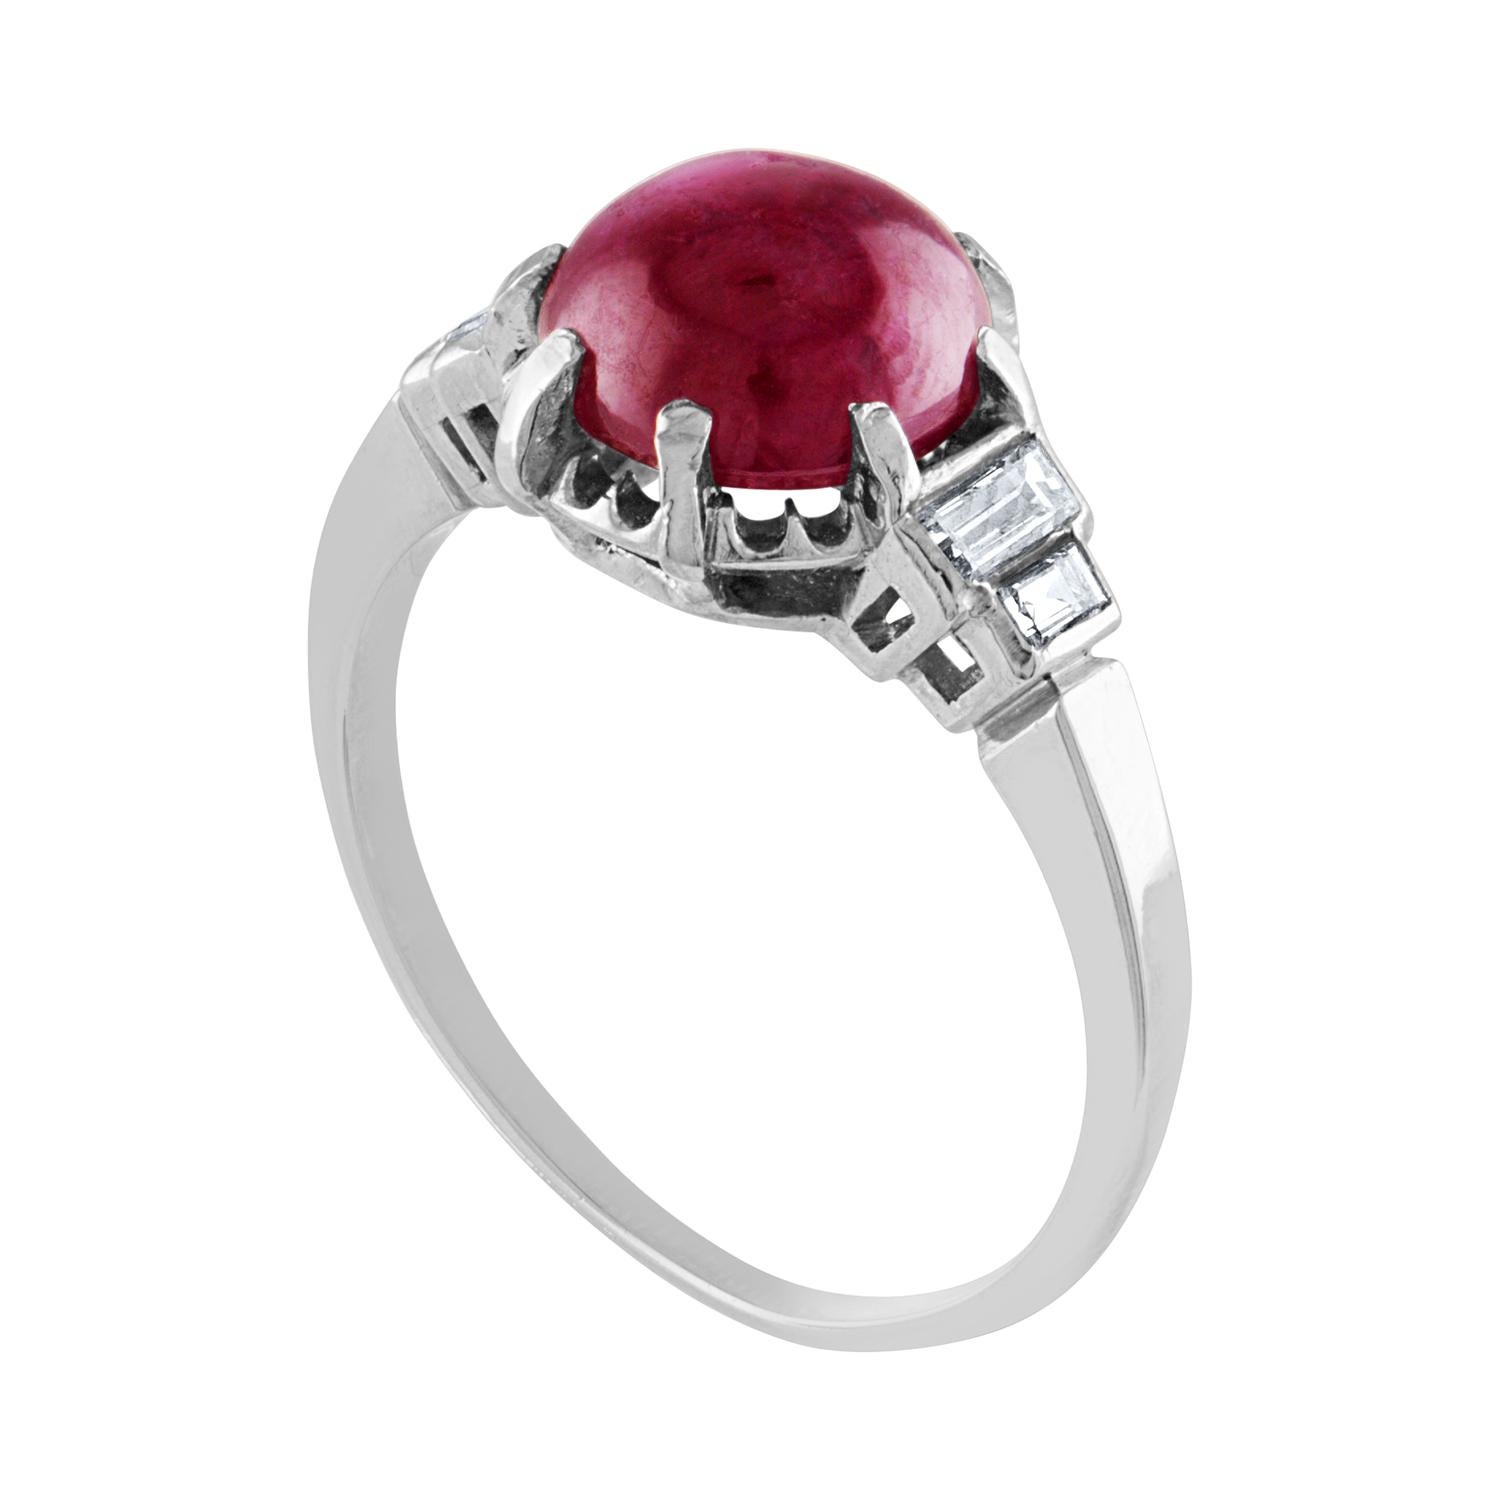 Cabochon Diamond Ring
The ring is Platinum.
The Cabochon Ruby is a 3.02 Carats
There are 0.20 Carats in Diamonds G/H VS
The ring is a size 5.5, sizable.
The ring weighs 3.8 grams